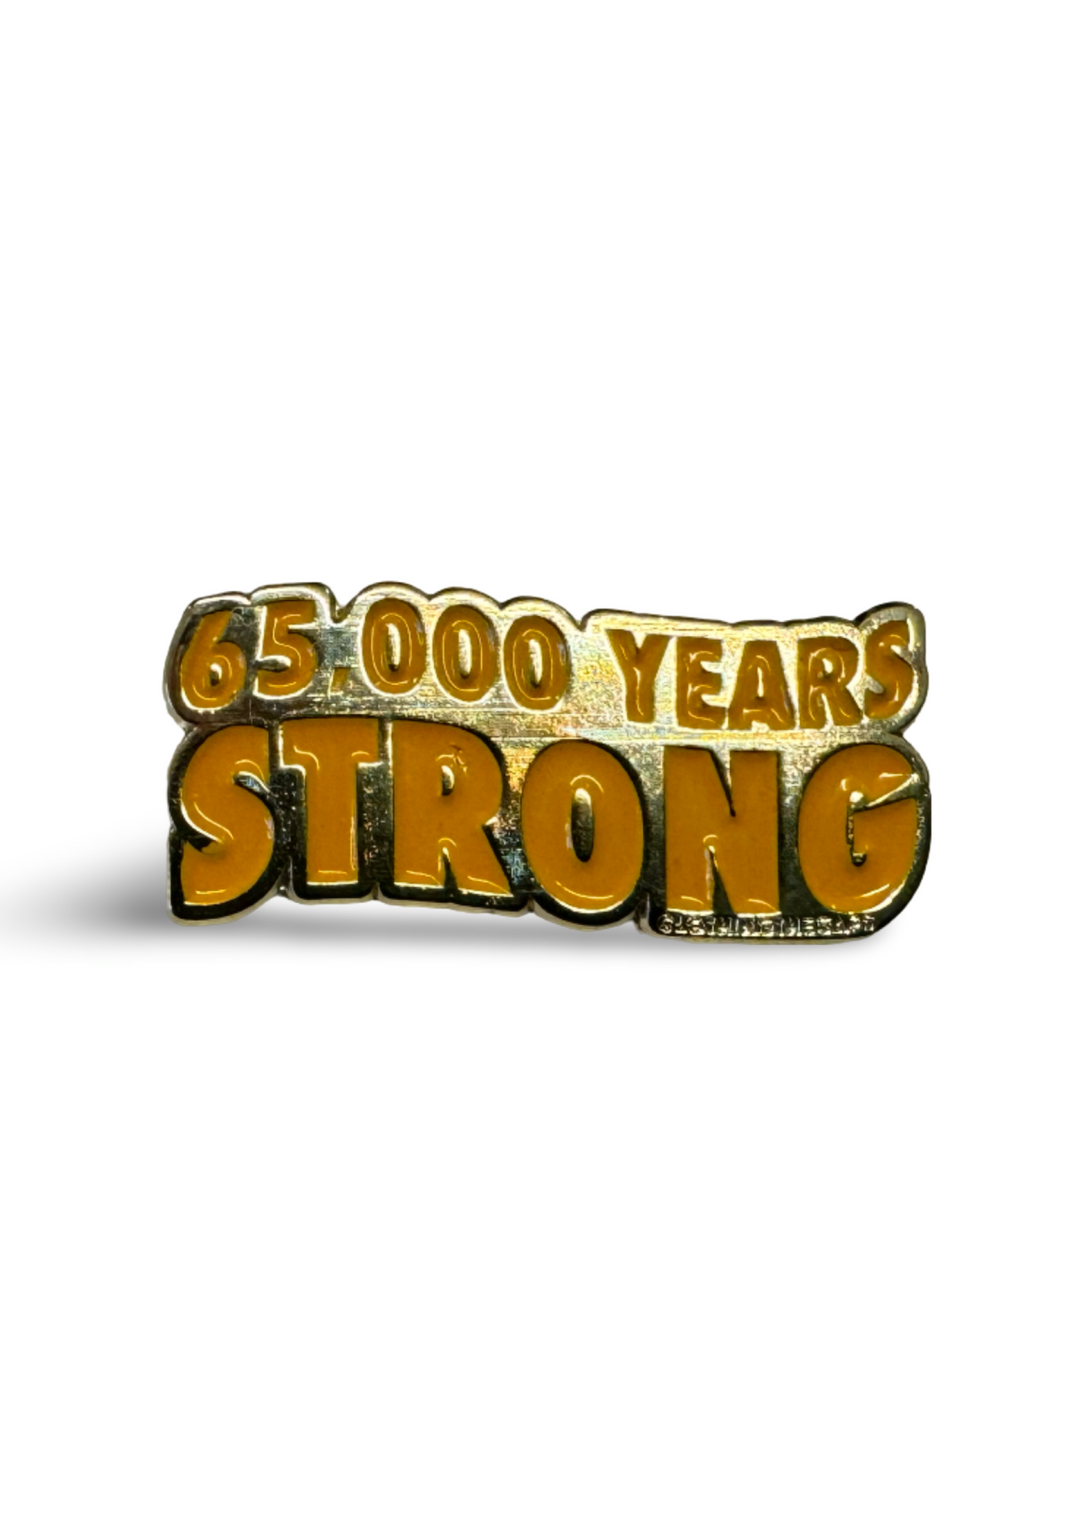 65000 years strong clothing the gaps